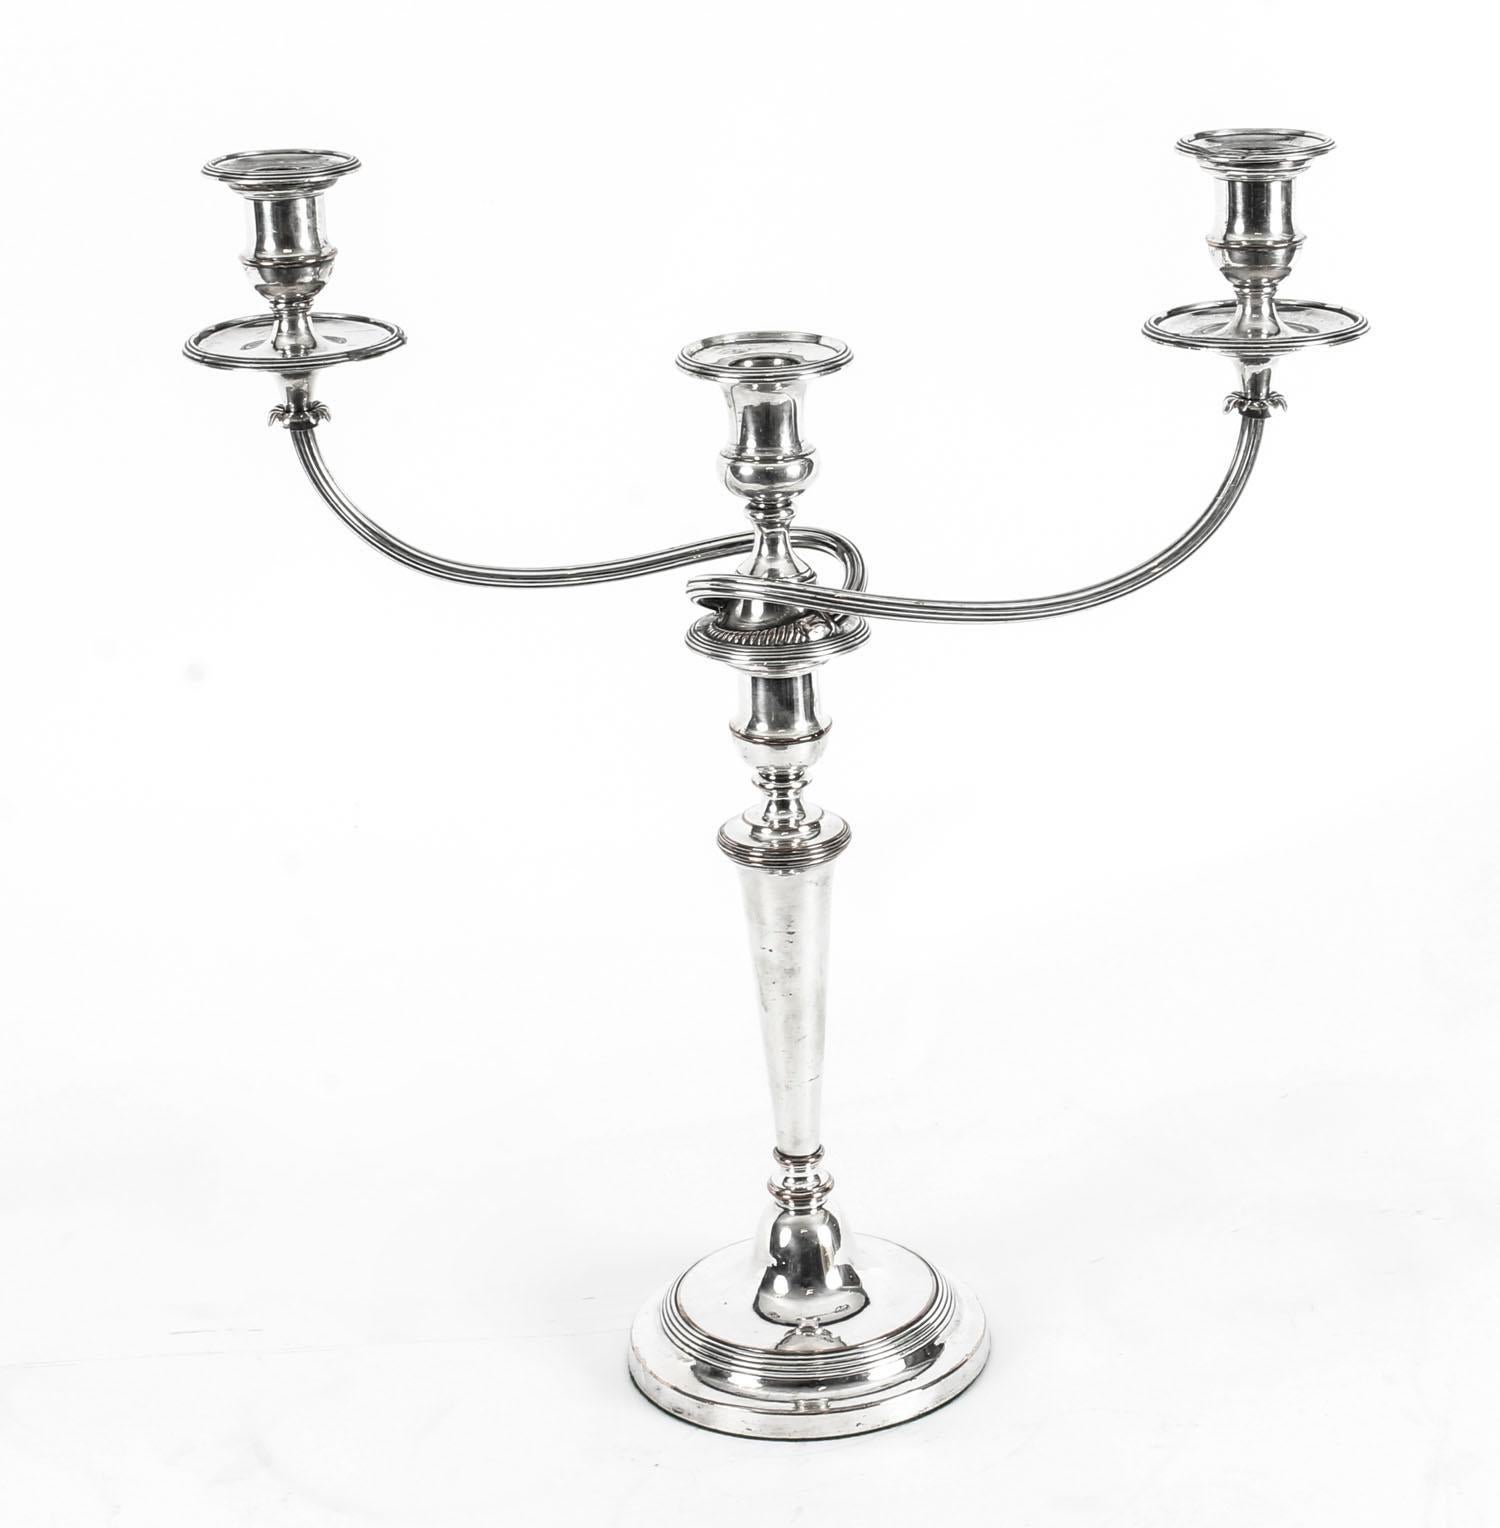 This is a stunning pair of antique English Old Sheffield silver on copper, three light, two-branch table candelabra, circa 1780 in date, and bearing the 